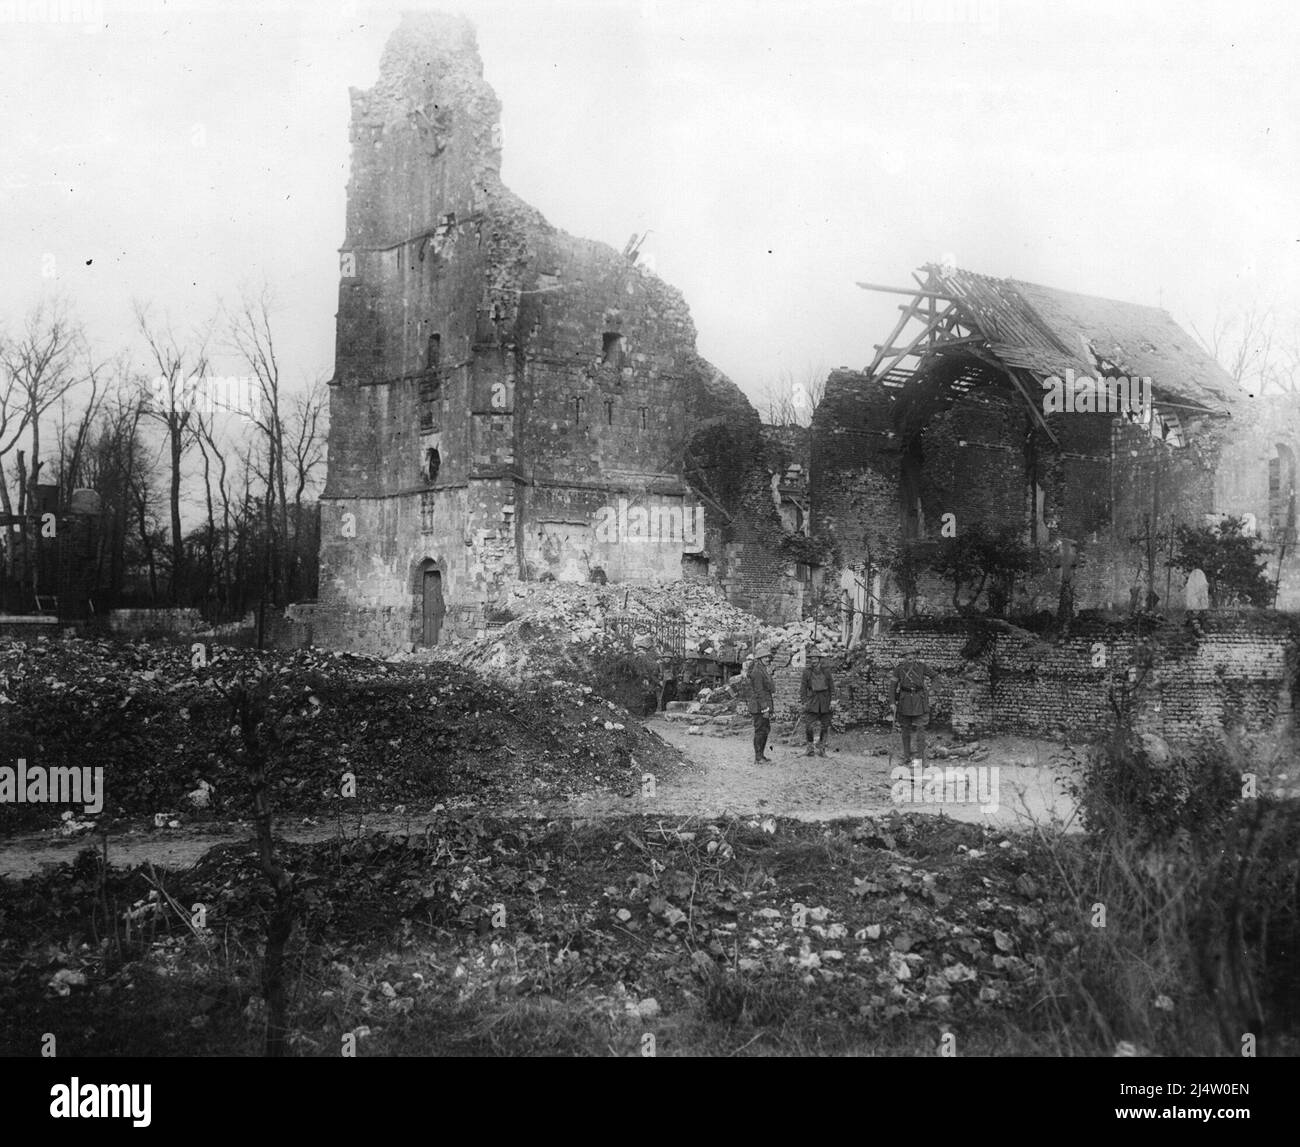 Ruined church and graveyard, during World War I. Three soldiers are visible at the foot of the photograph, although they are dwarfed by the size of the now destroyed church. The crosses in the yard at the side of the church are, poignantly, still standing. Stock Photo